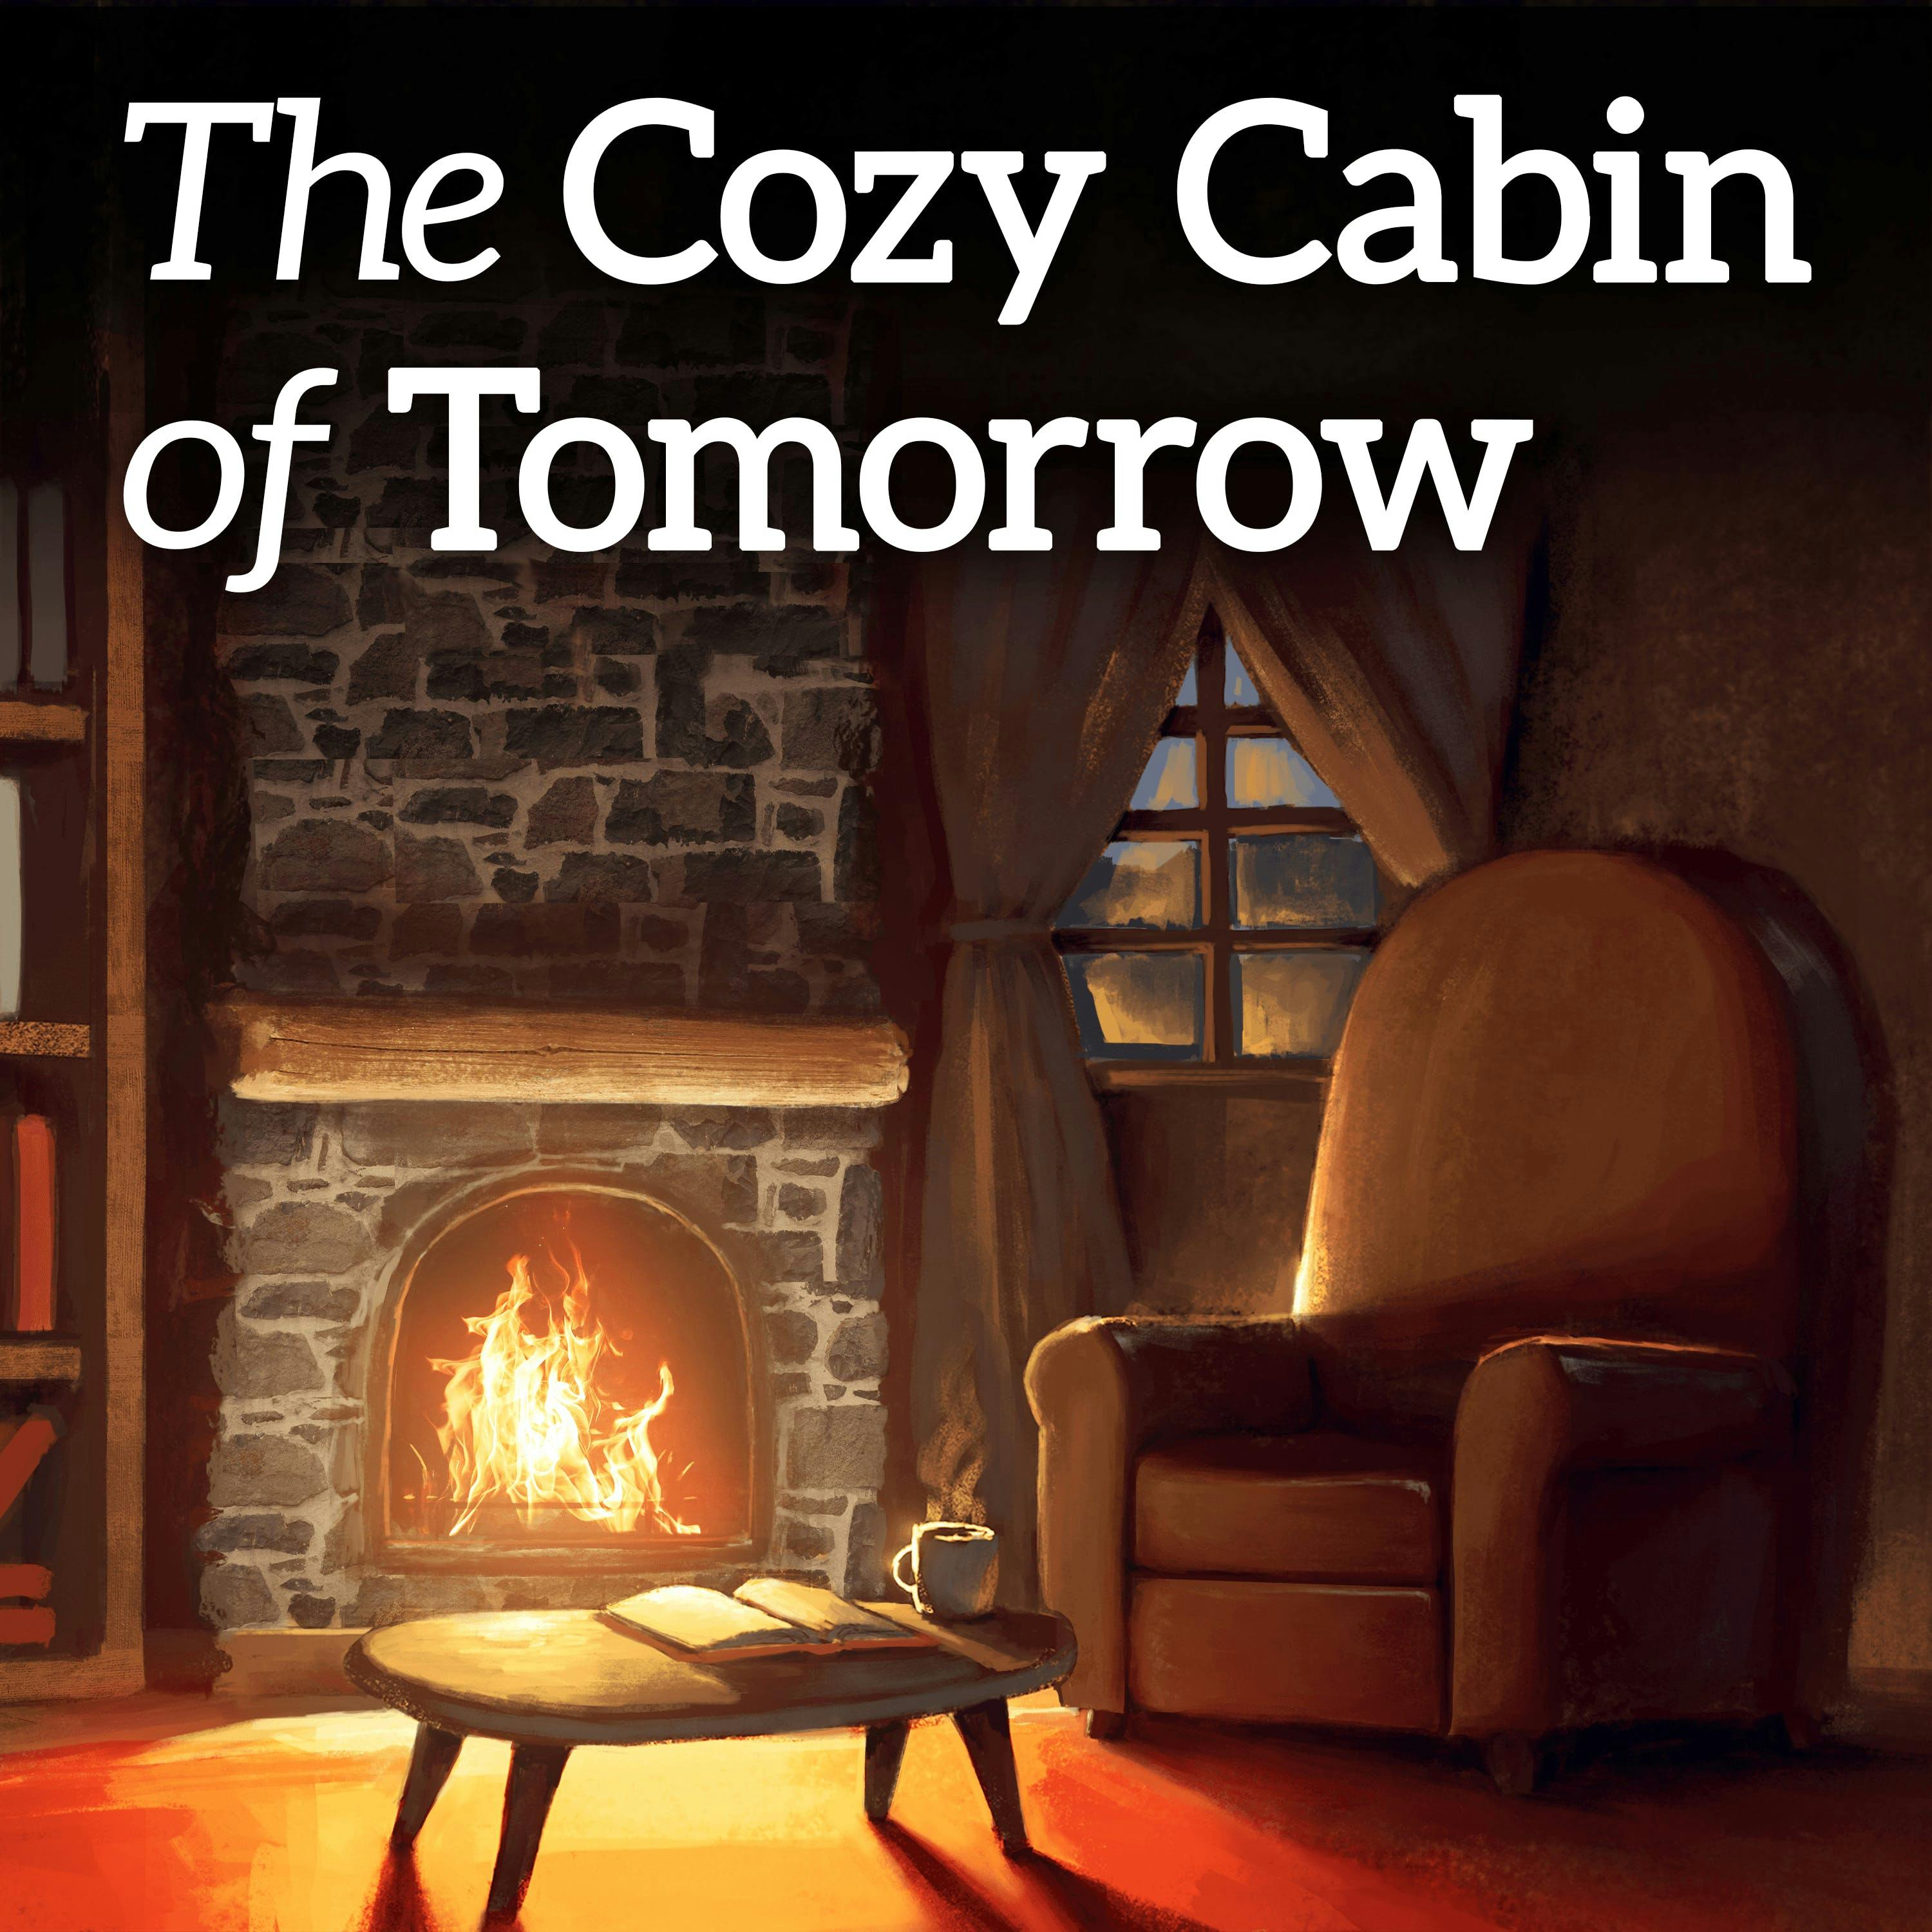 The Cozy Cabin of Tomorrow